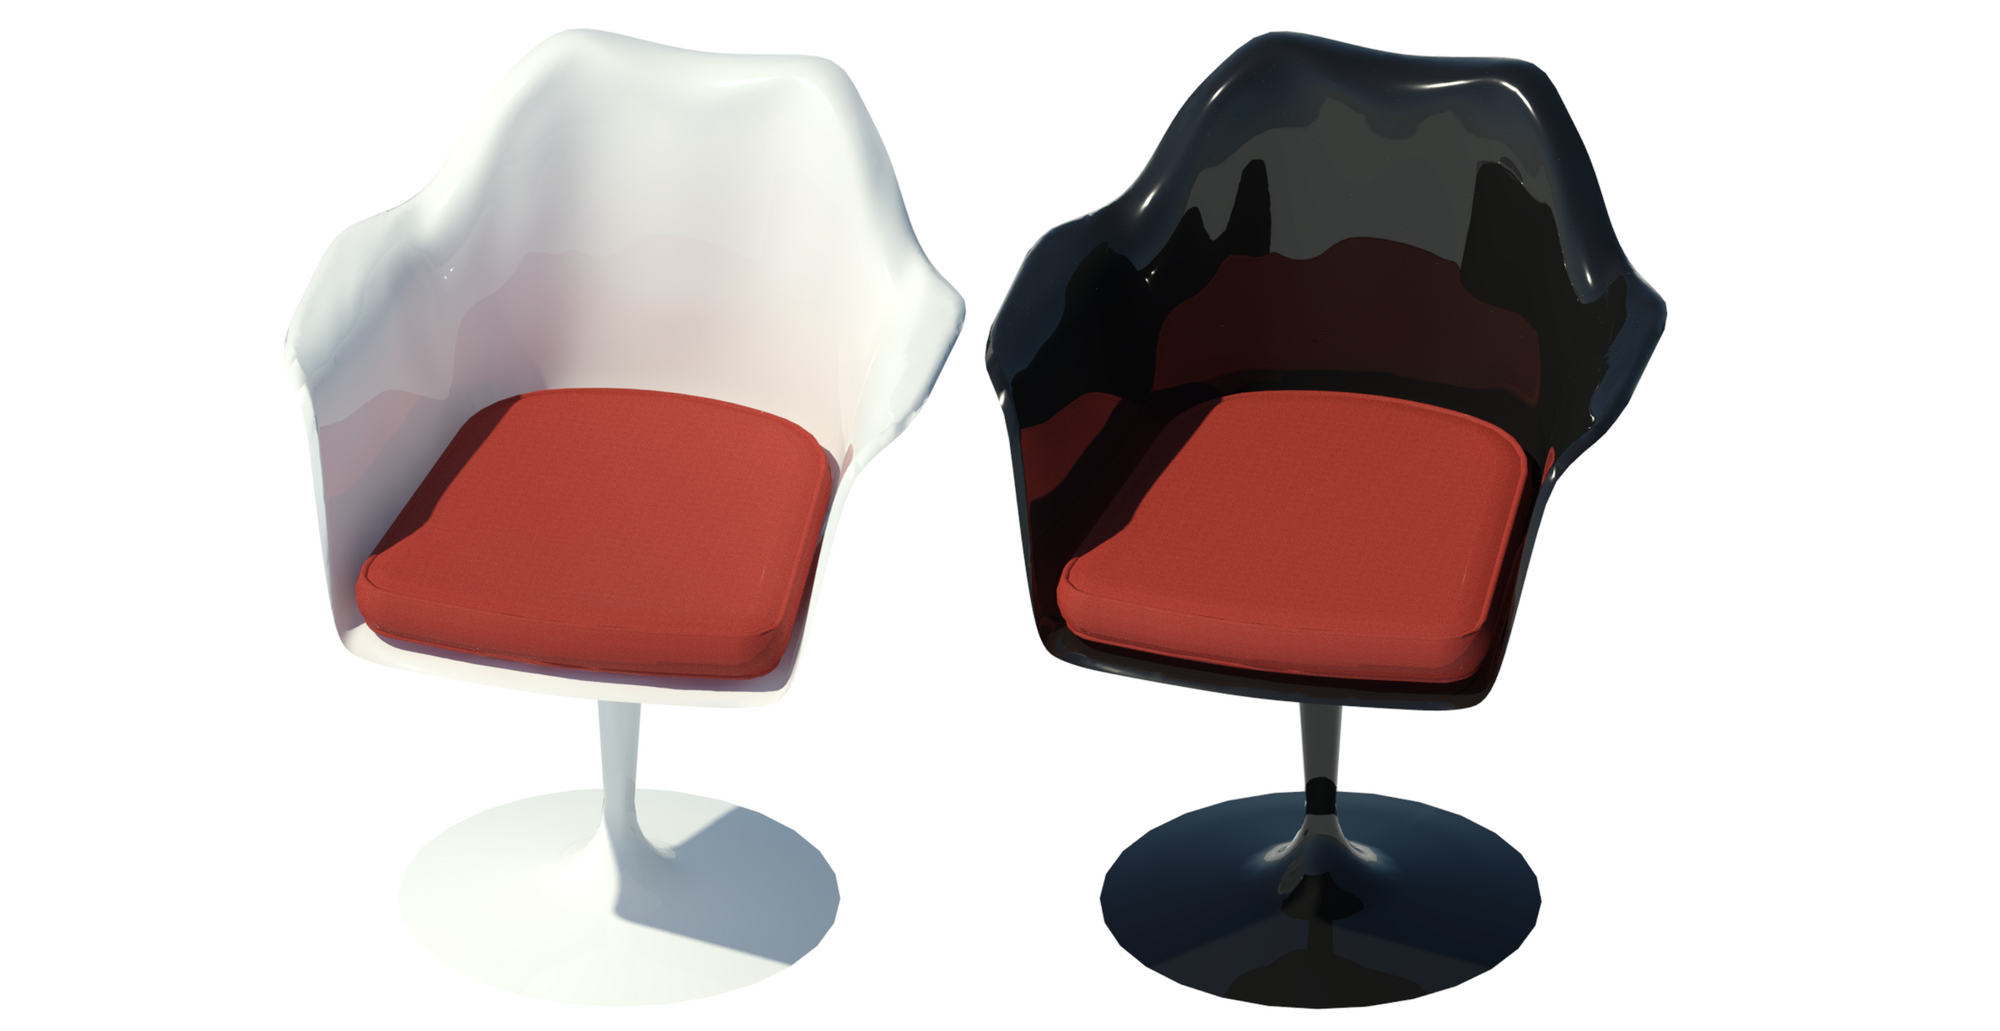 Revit raytrace showing red textile cushion in black and white body variations.